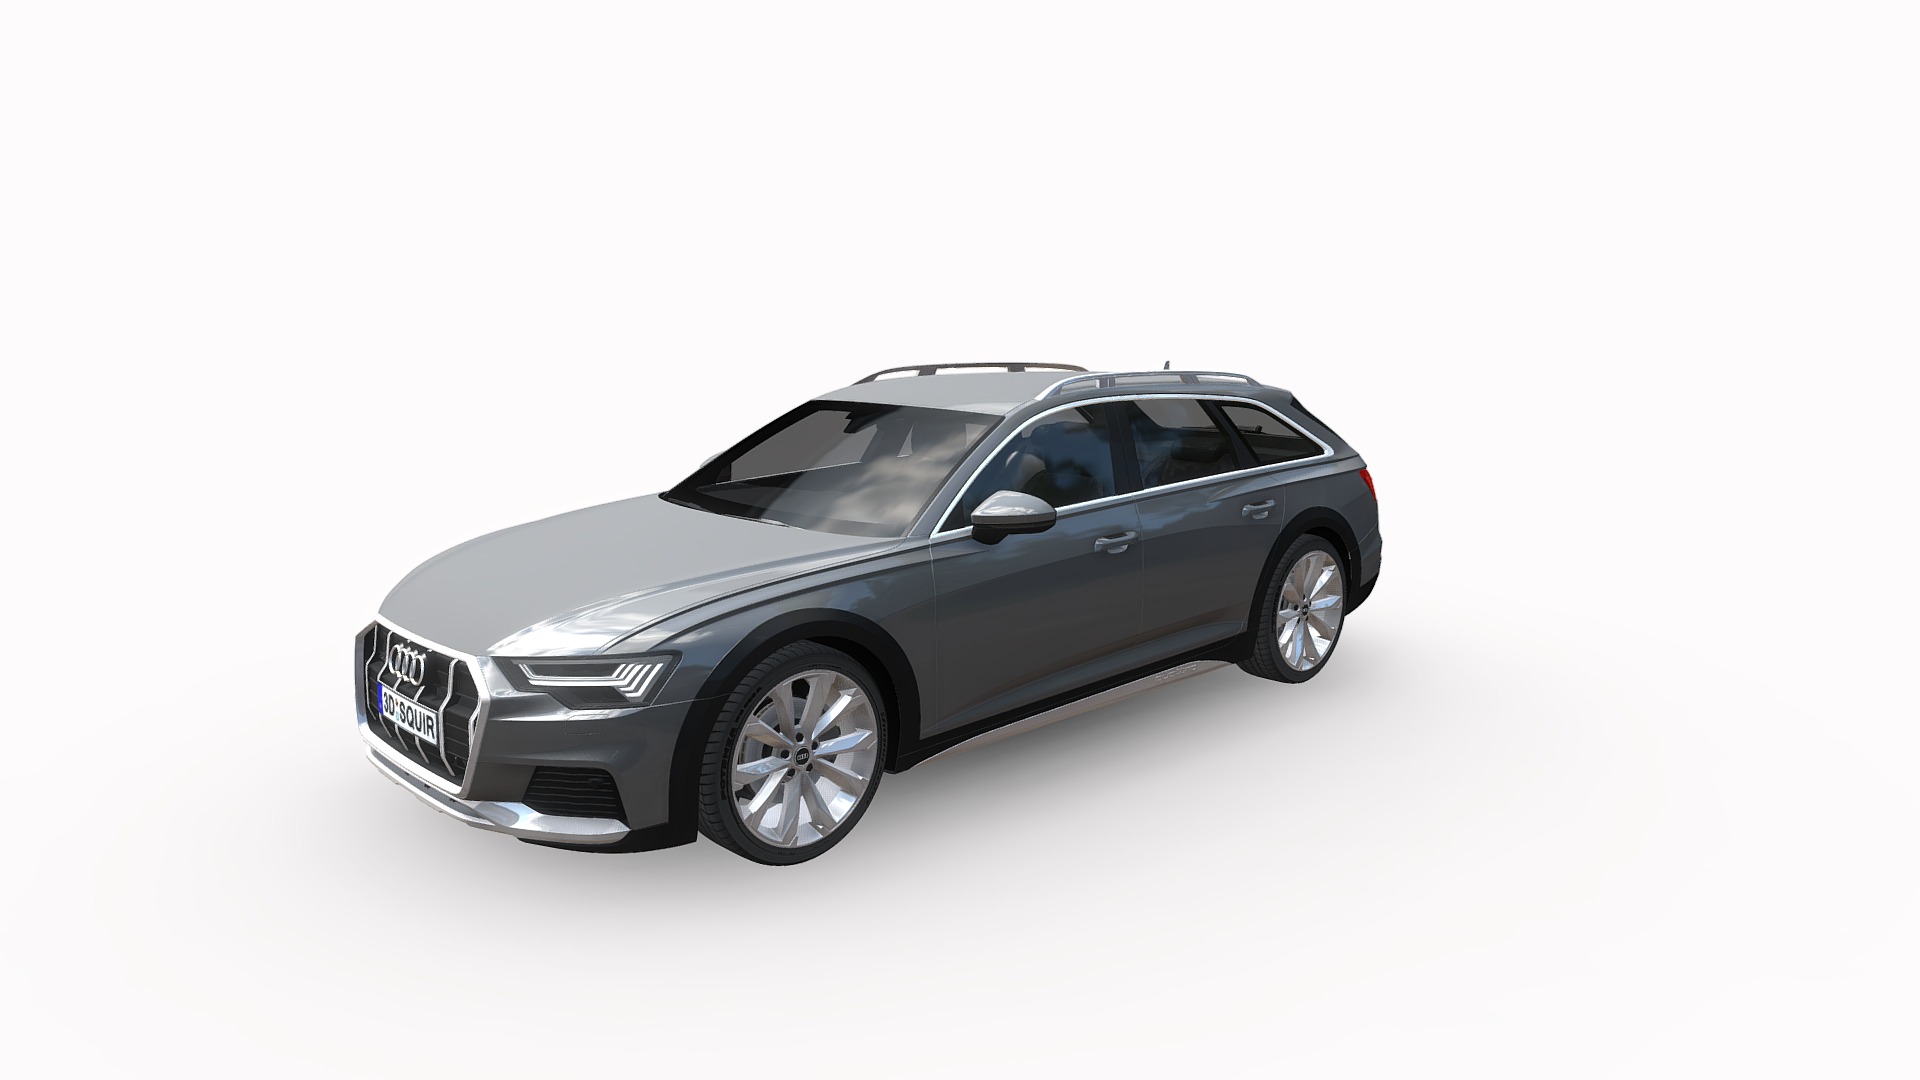 3D model Audi A6 Avant Allroad 2020 - This is a 3D model of the Audi A6 Avant Allroad 2020. The 3D model is about a silver car with a white background.